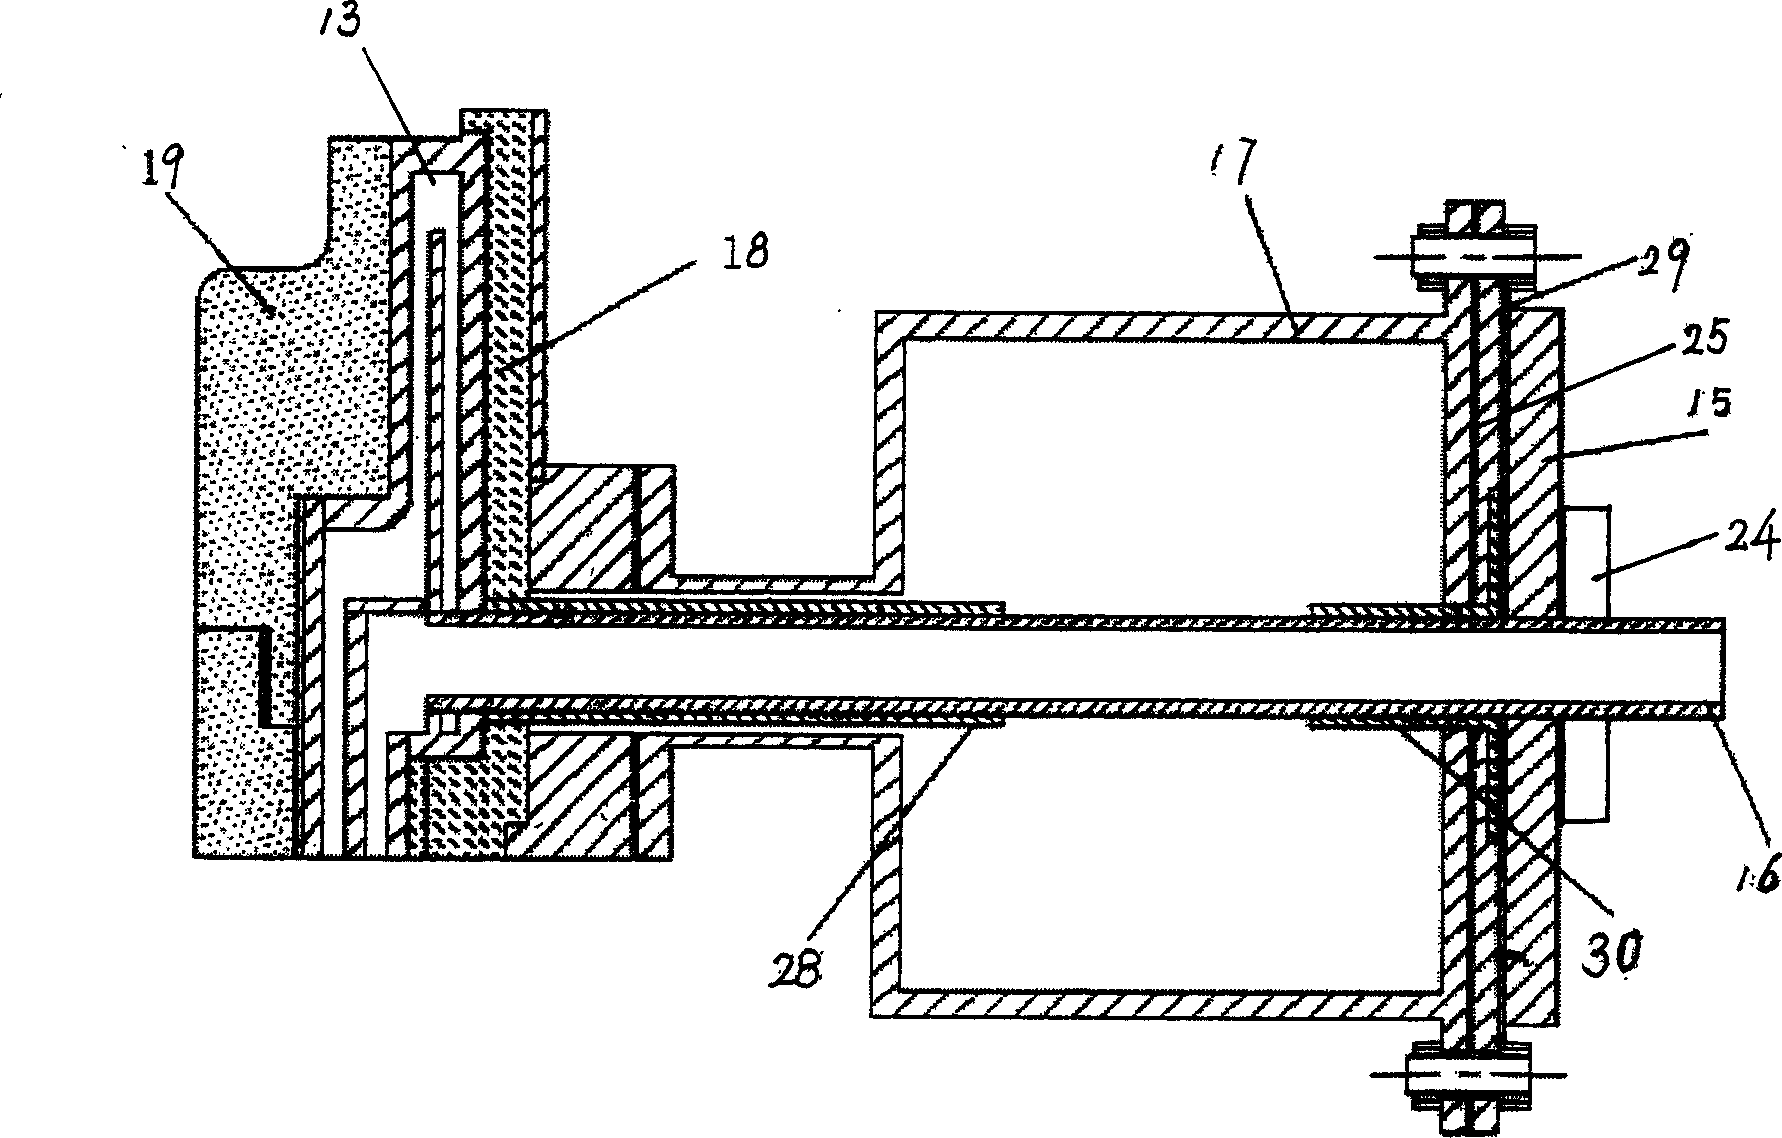 Apparatus and process for producing acetylene by low-temperature plasmochemical pyrolysis of natural gas